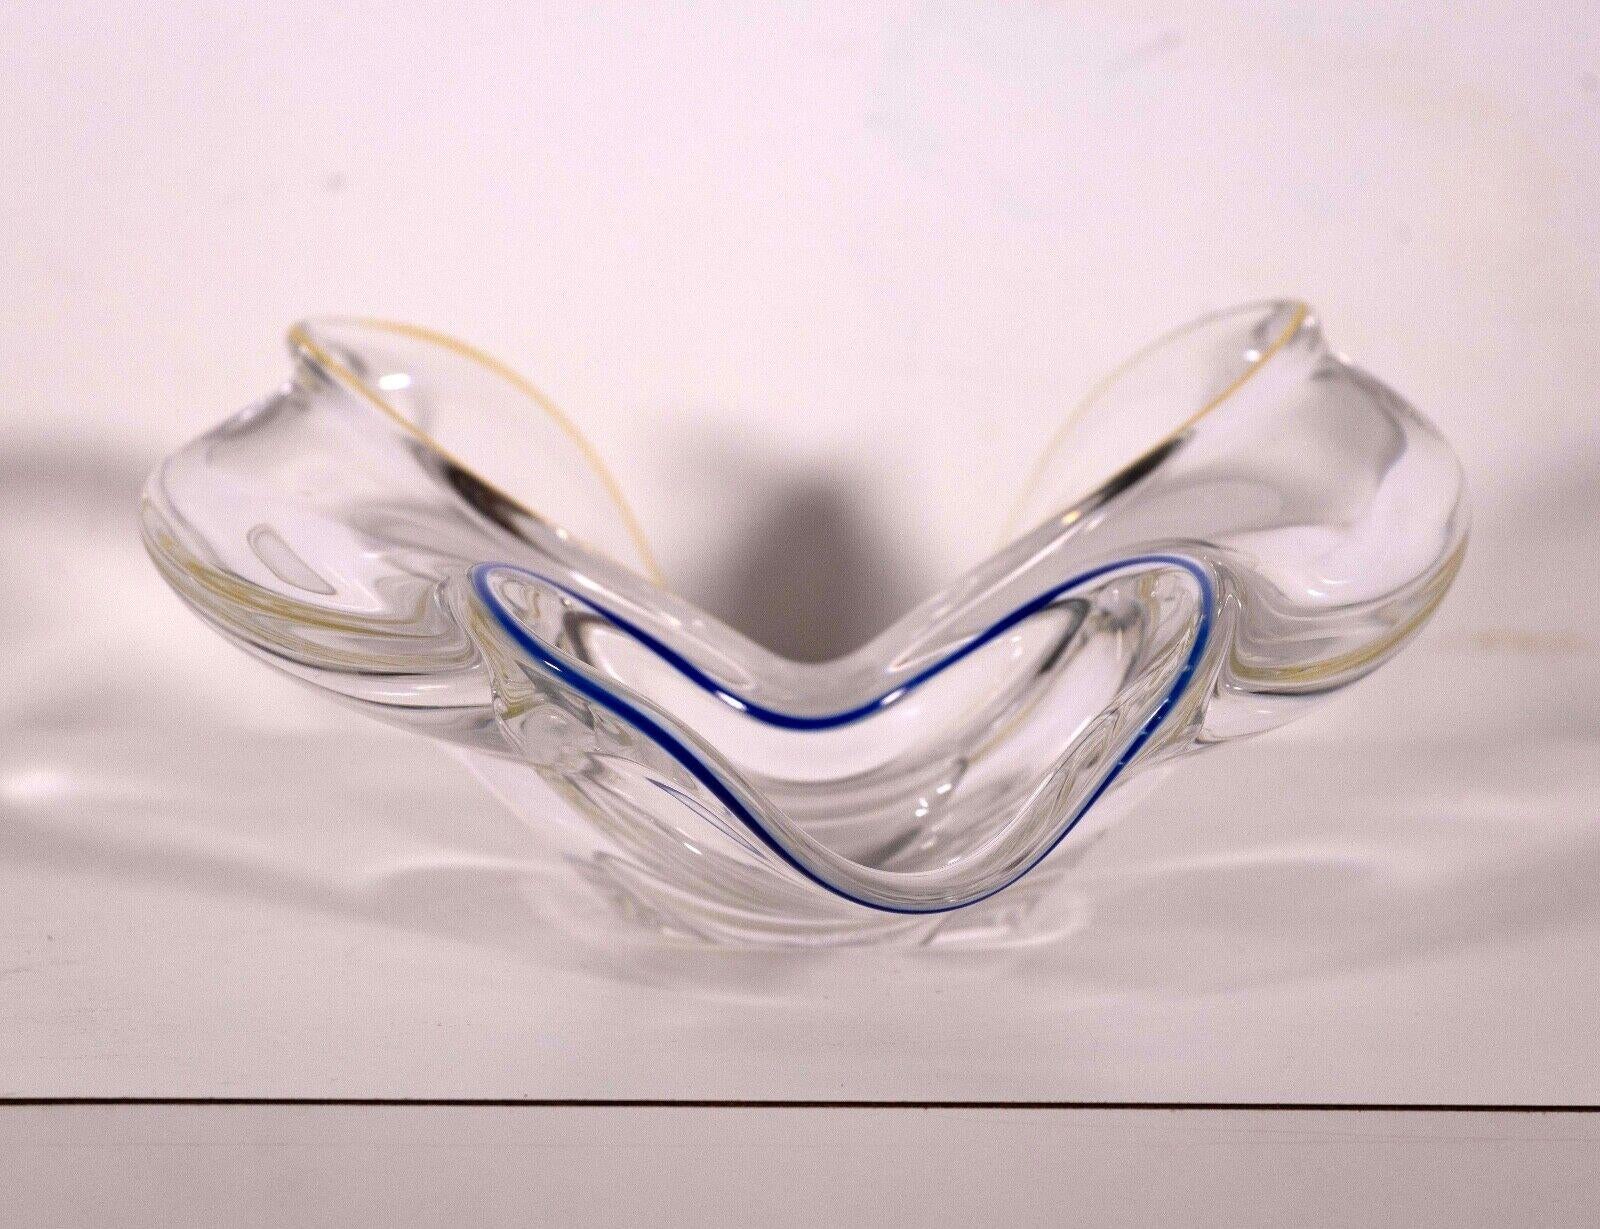 Frantisek Zemek Signed Blue and Yellow Abstract Glass Sculpture with Dual Bowls In Good Condition For Sale In Keego Harbor, MI